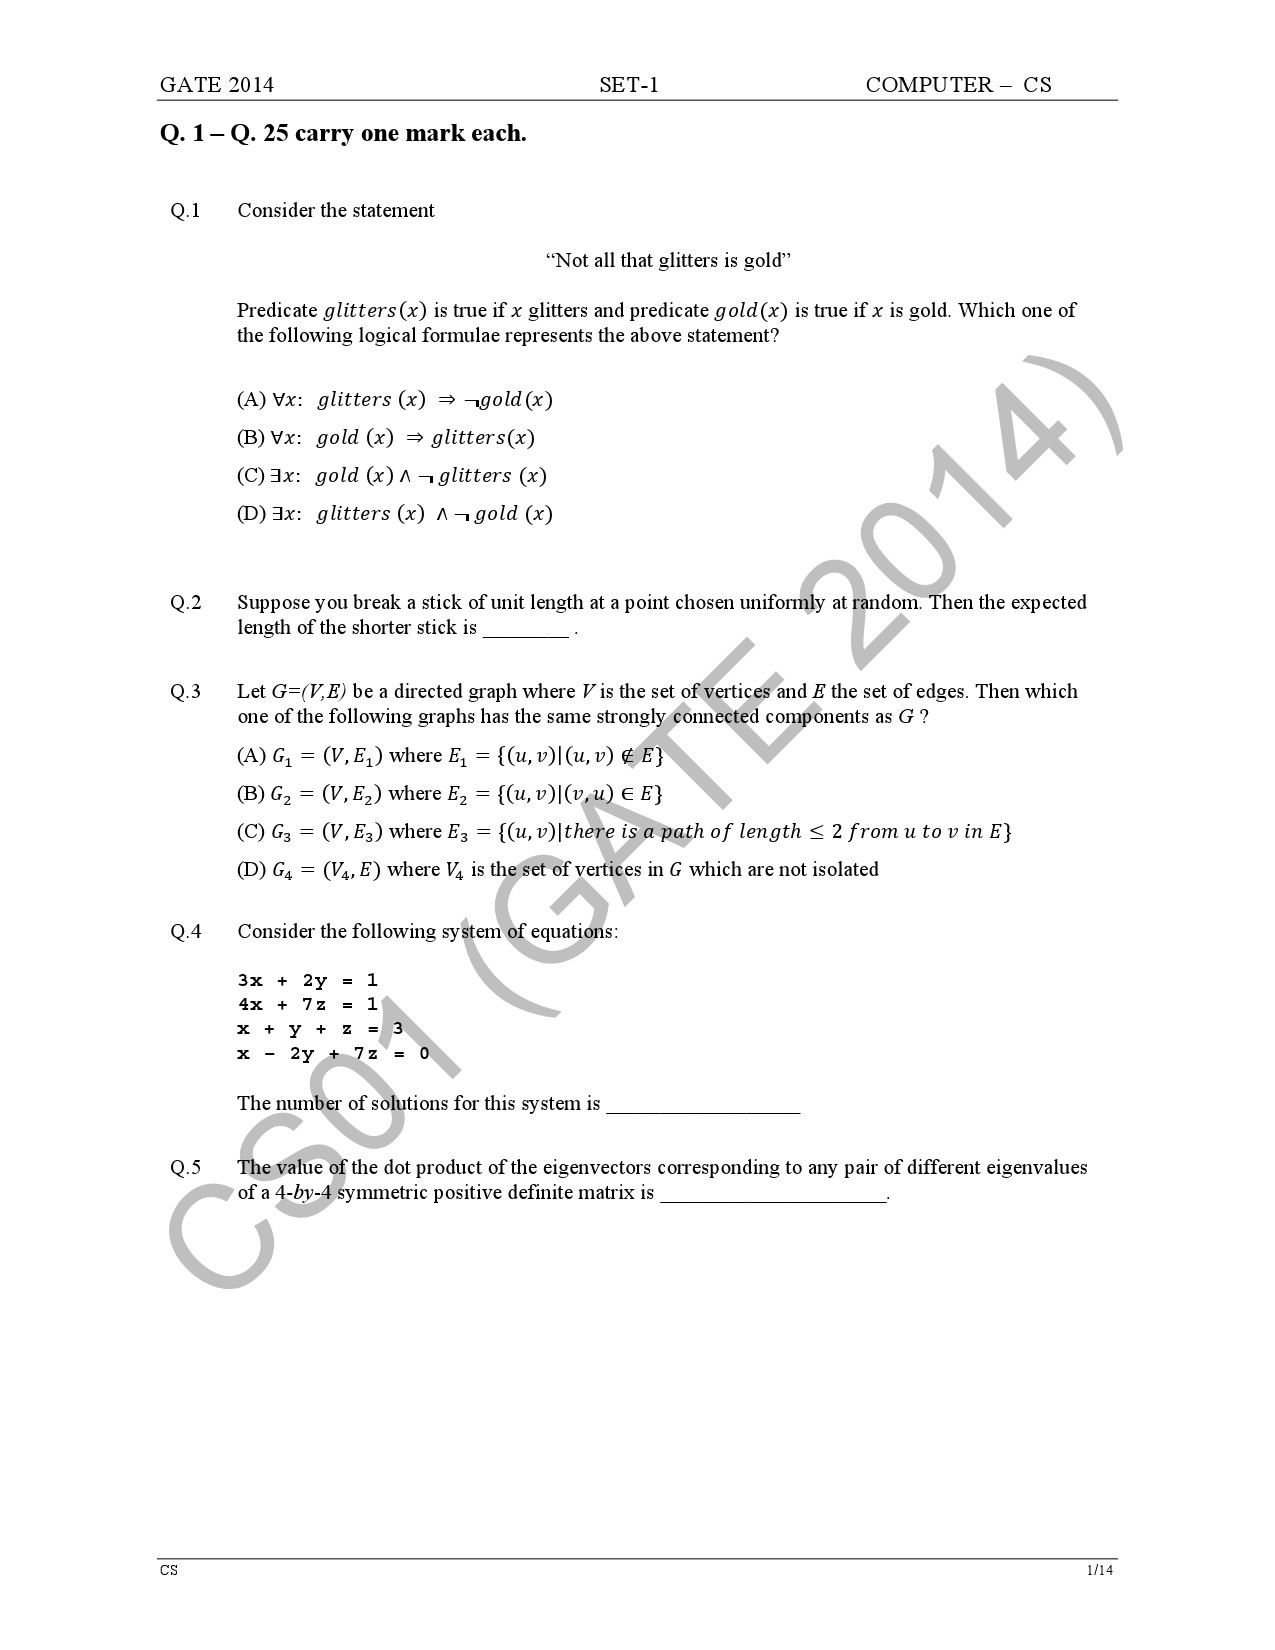 GATE Exam Question Paper 2014 Computer Science and Information Technology Set 1 7